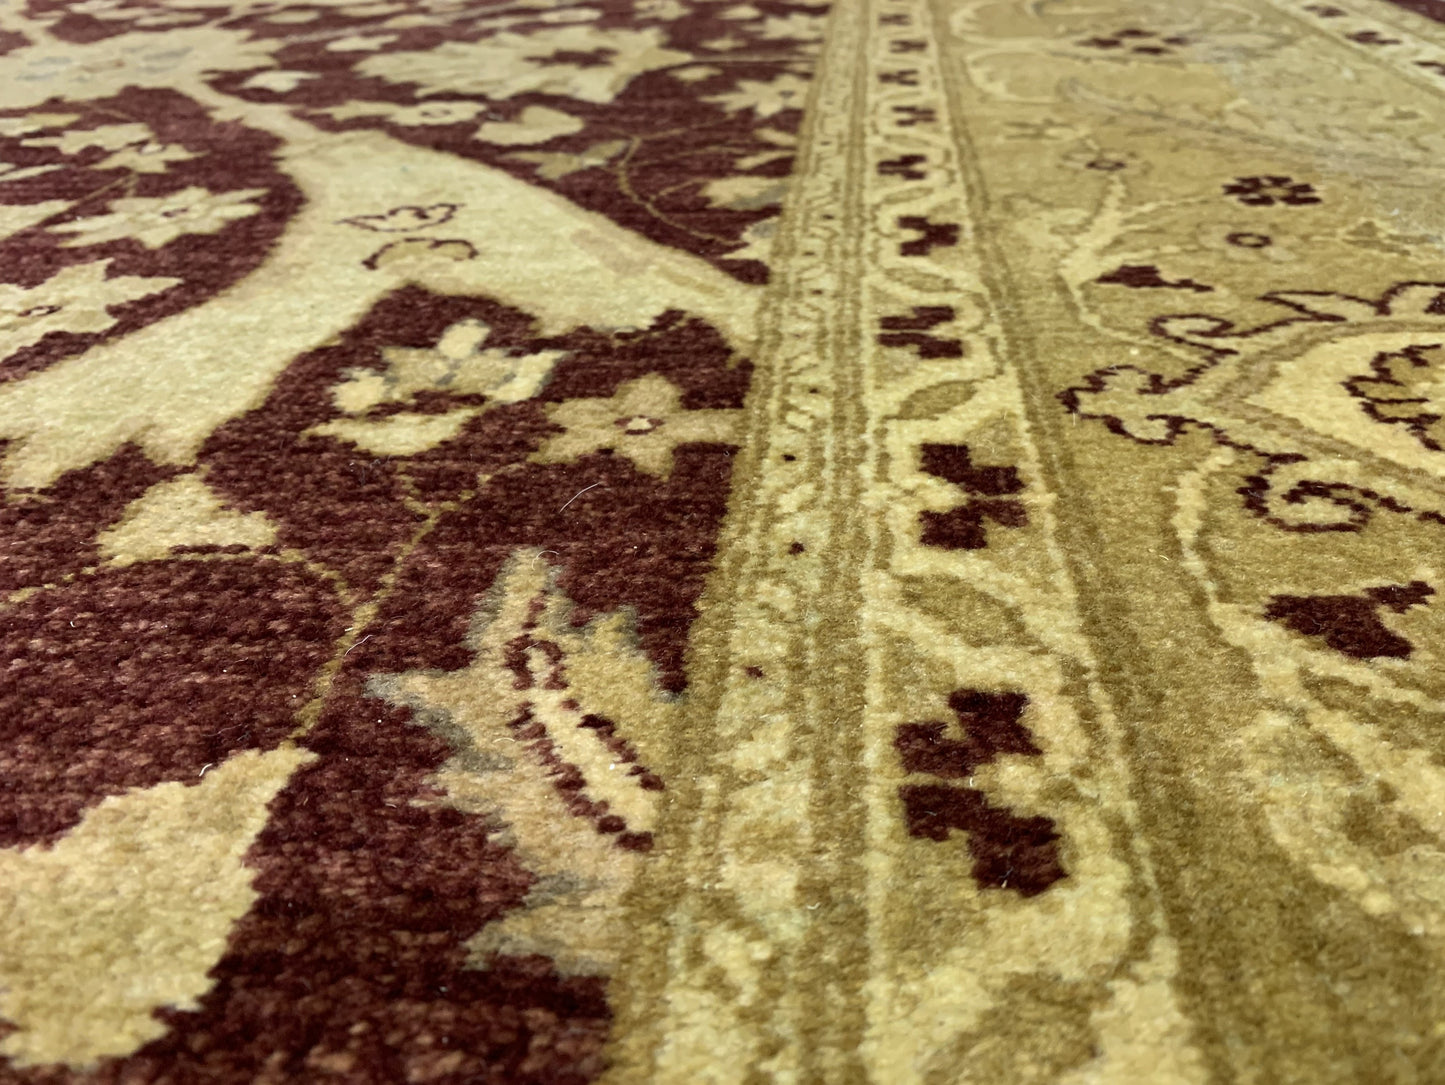 Classic Indo-Persian rug in wool - hand knotted